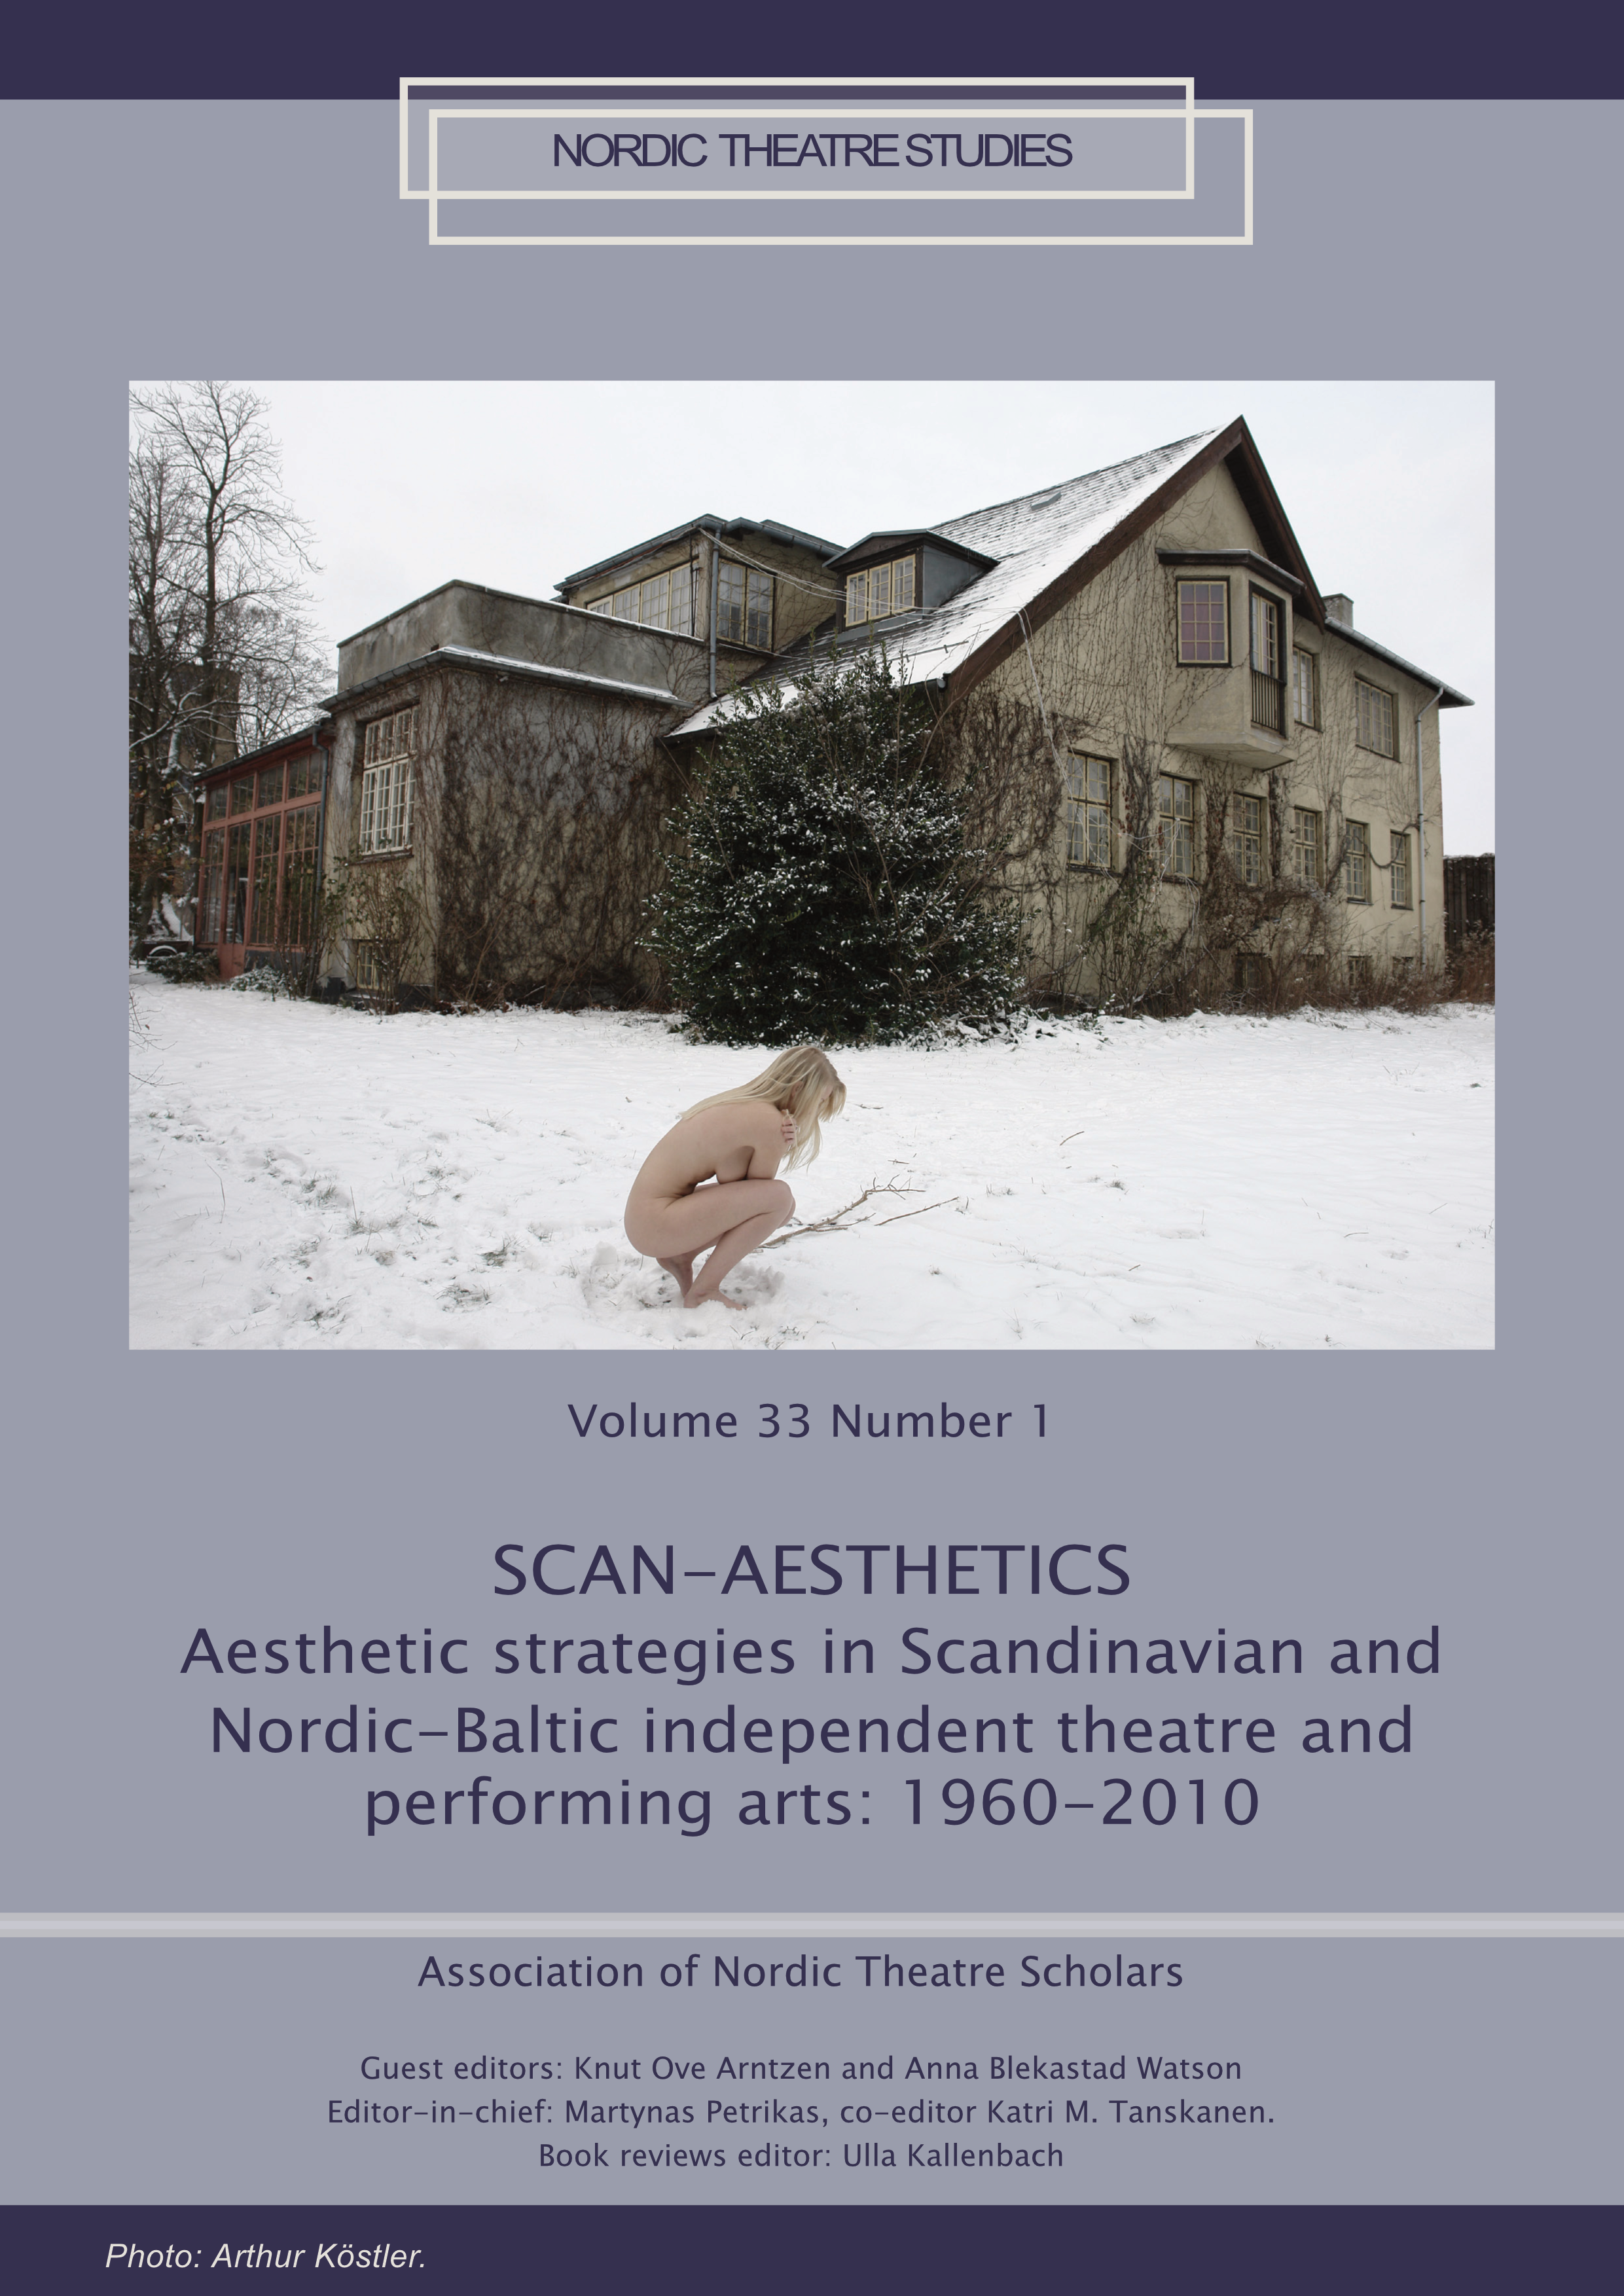 					View Vol. 33 No. 1 (2021): SCAN-AESTHETICS: Aesthetic strategies in Scandinavian and Nordic-Baltic independent theatre and performing arts: 1960-2010
				